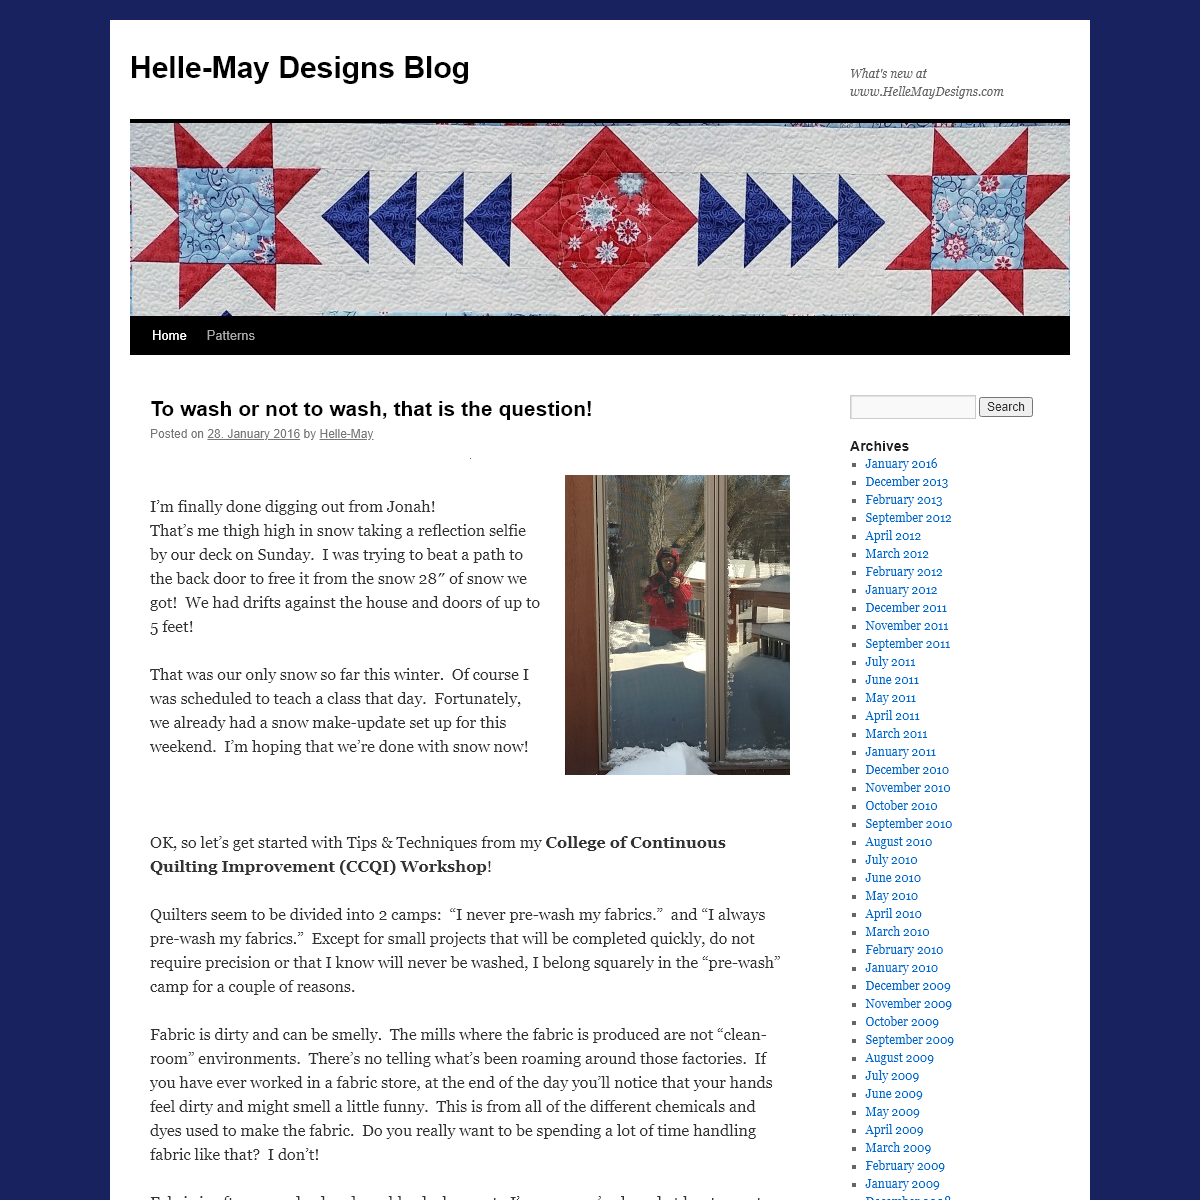 Helle-May Designs Blog - What`s new at www.HelleMayDesigns.com